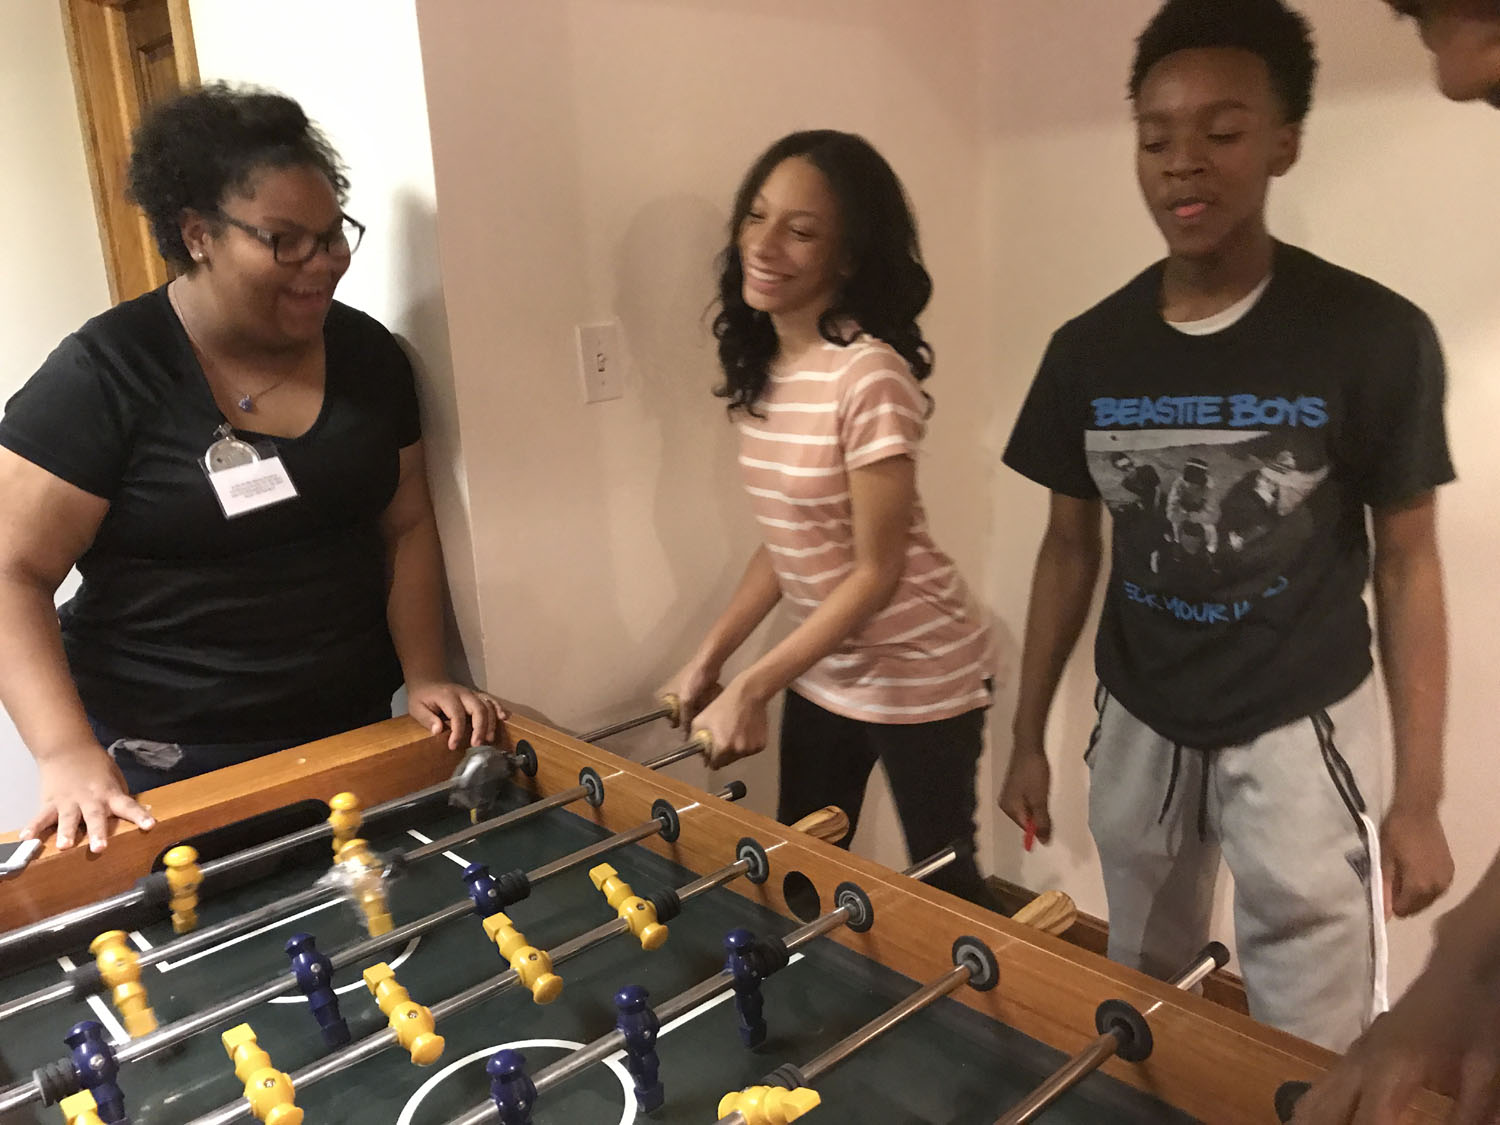 Children Playing Table Soccer